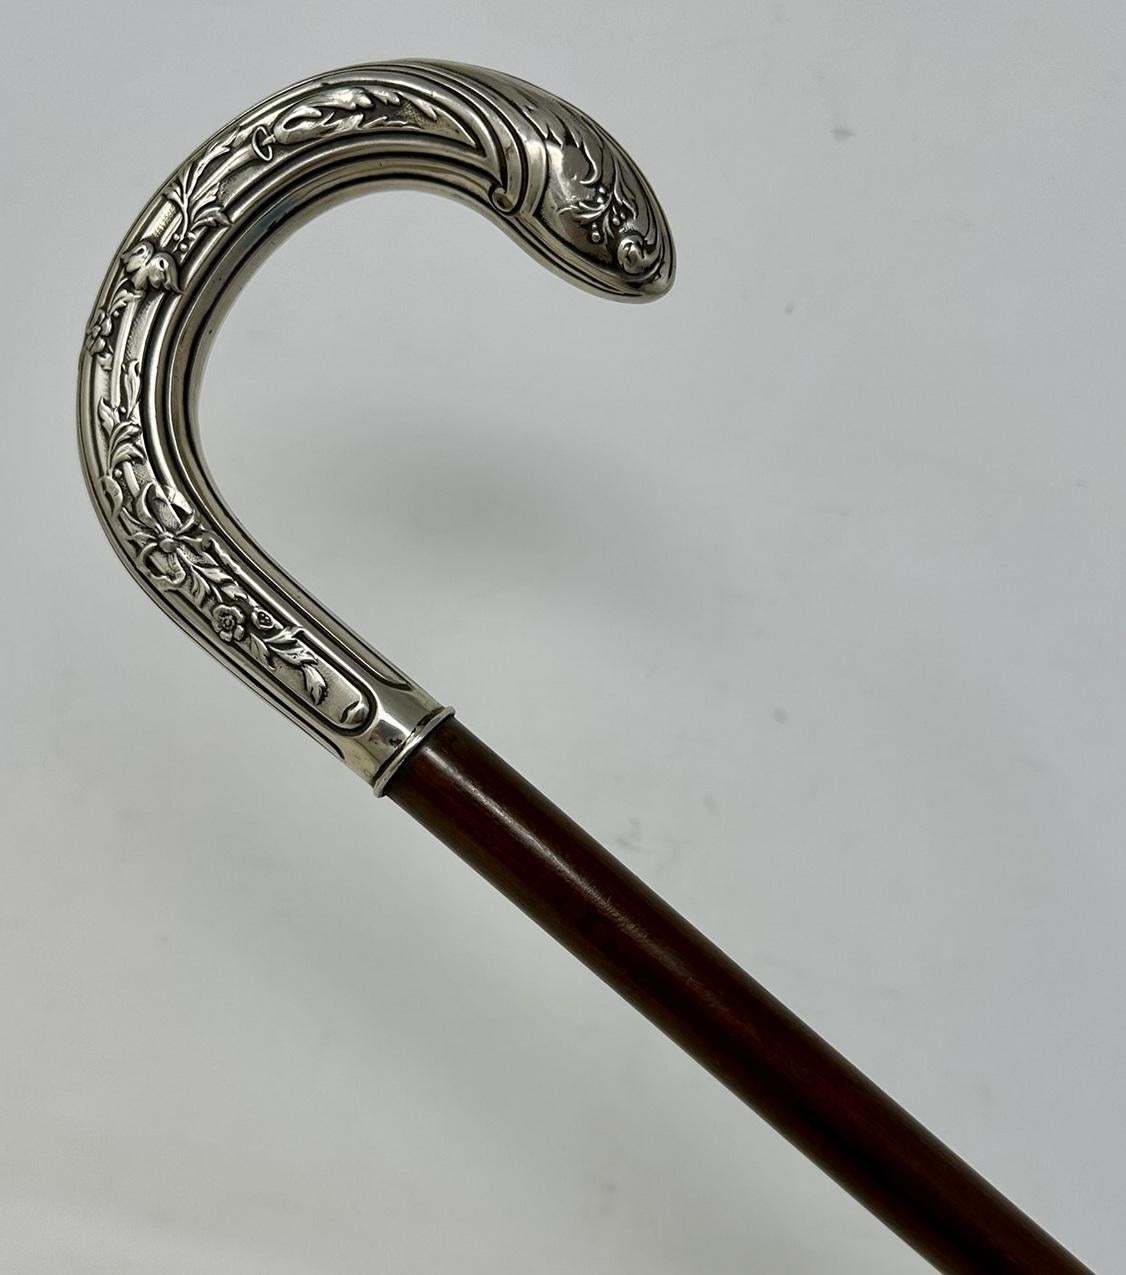 Antique Vintage Lady's Gentleman's Walking Stick Sterling Silver Crook Handle In Good Condition For Sale In Dublin, Ireland